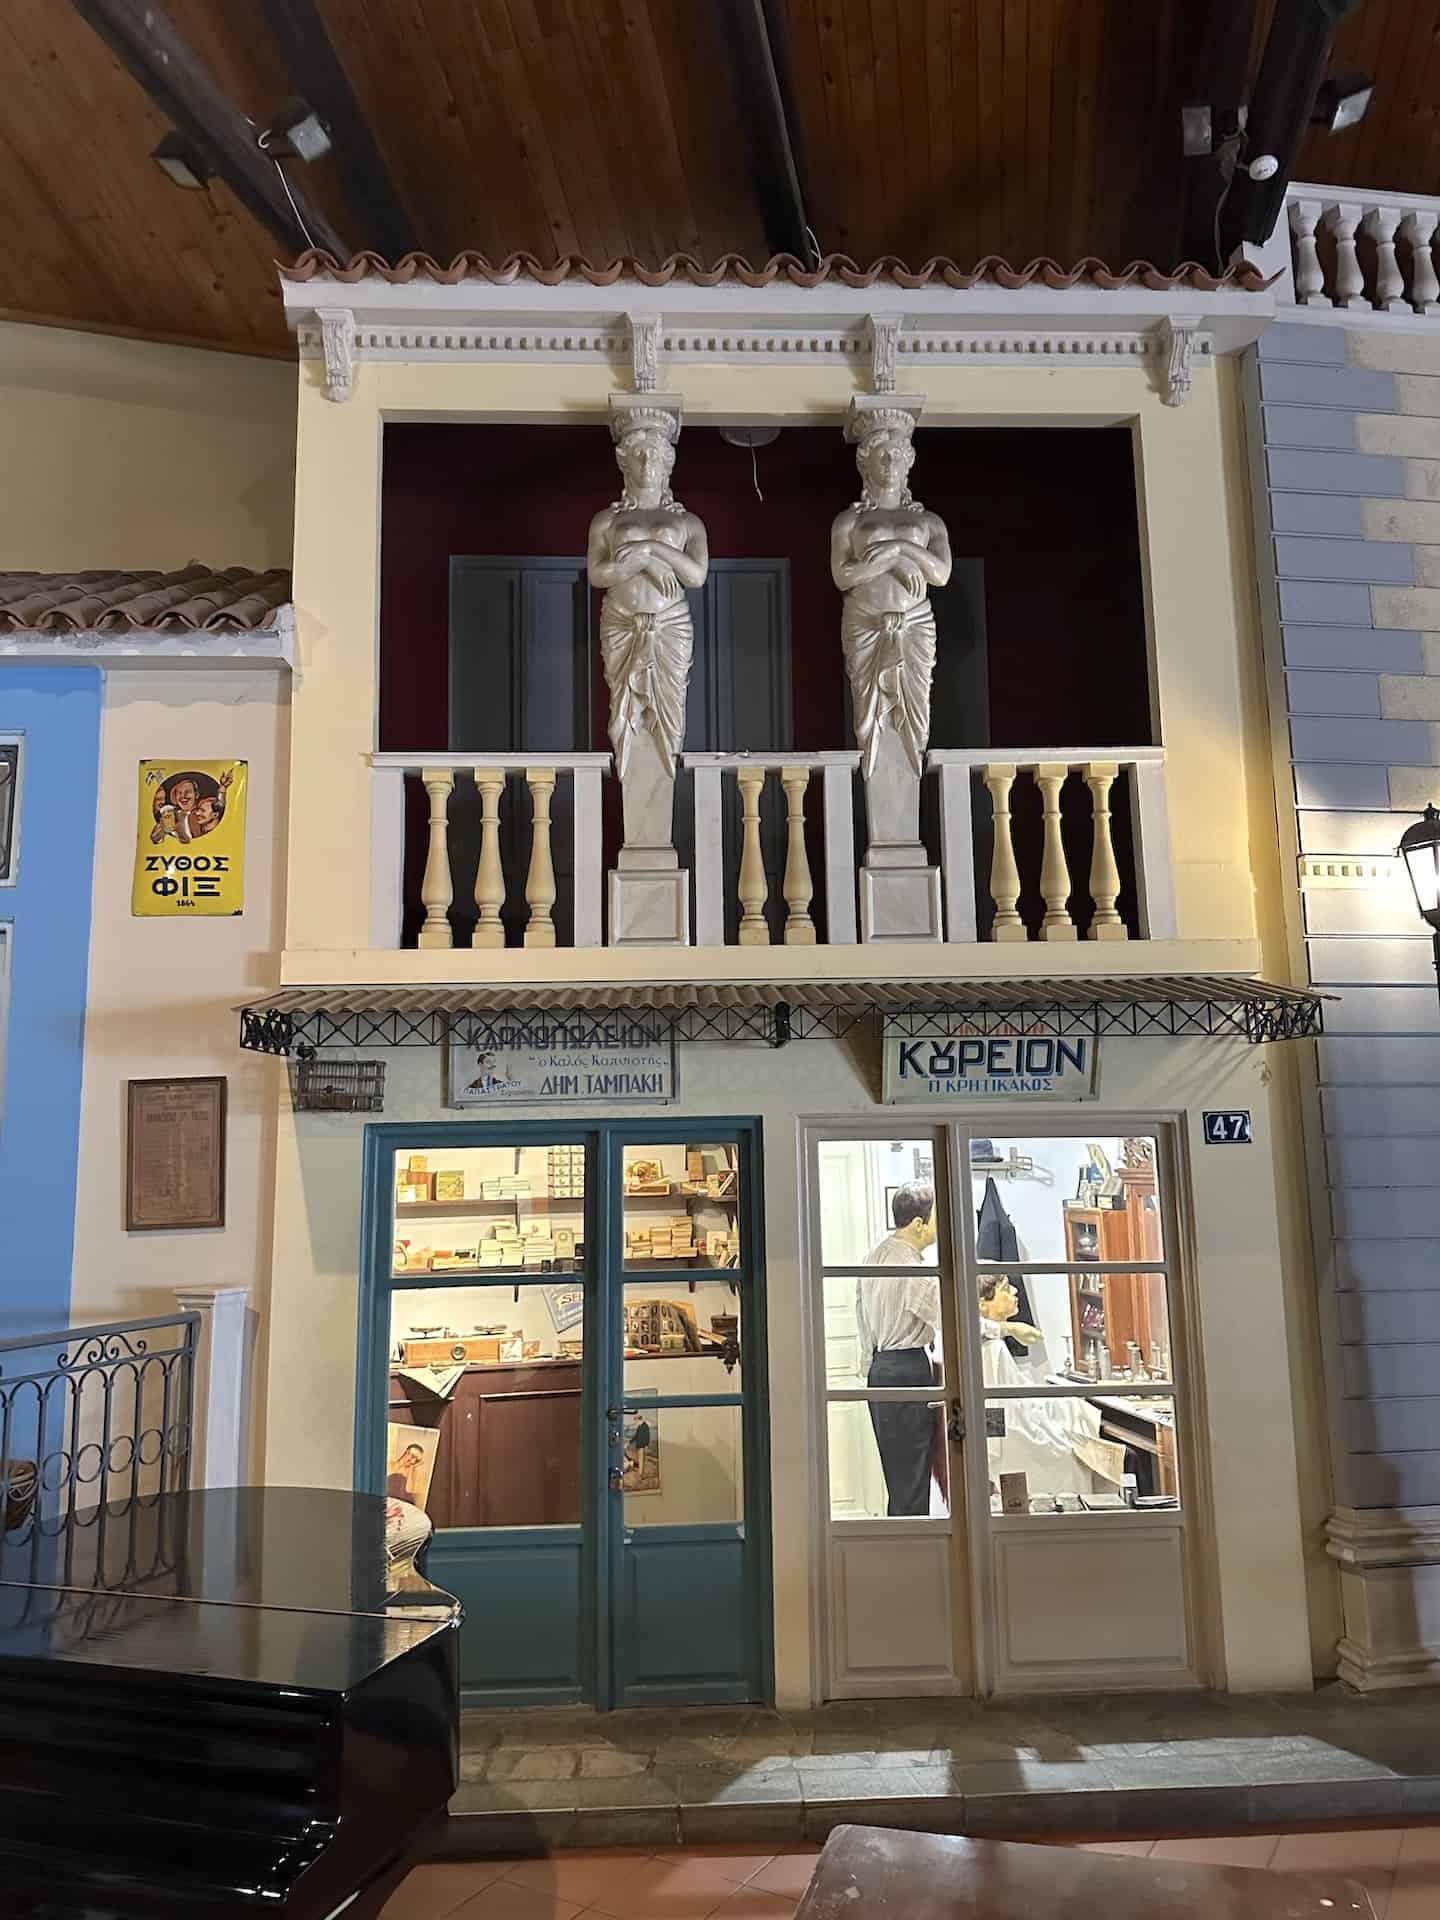 House with Caryatids at the Melina Mercouri Cultural Centre in Thiseio, Athens, Greece